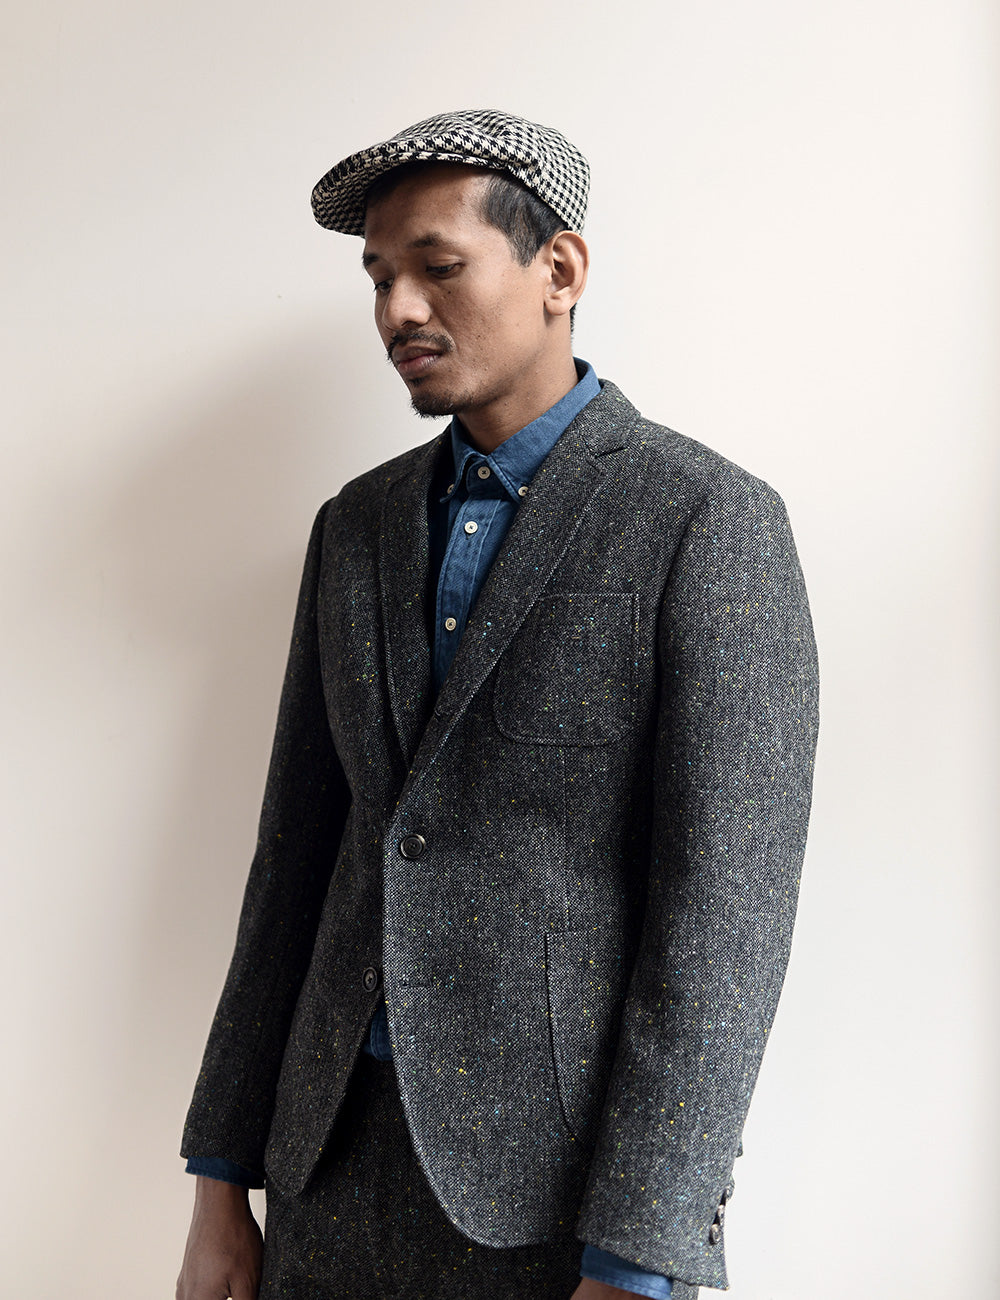 BKT35 Unstructured Jacket in Flecked Donegal Tweed - Lead Gray